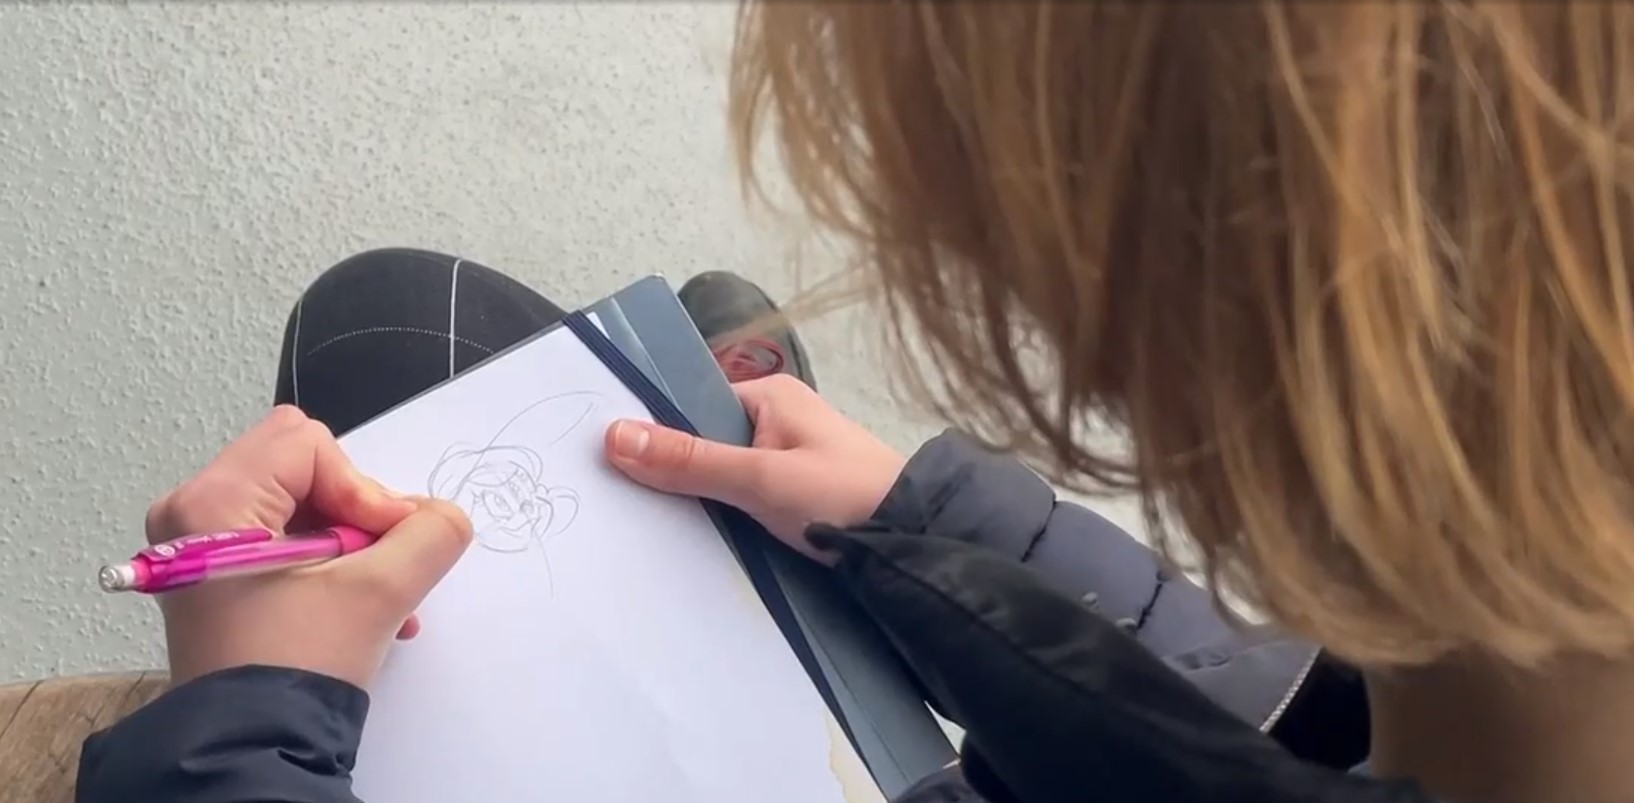 a person sitting outside sketching an image. a vancouver art student claims she was scammed out of hundreds of dollars